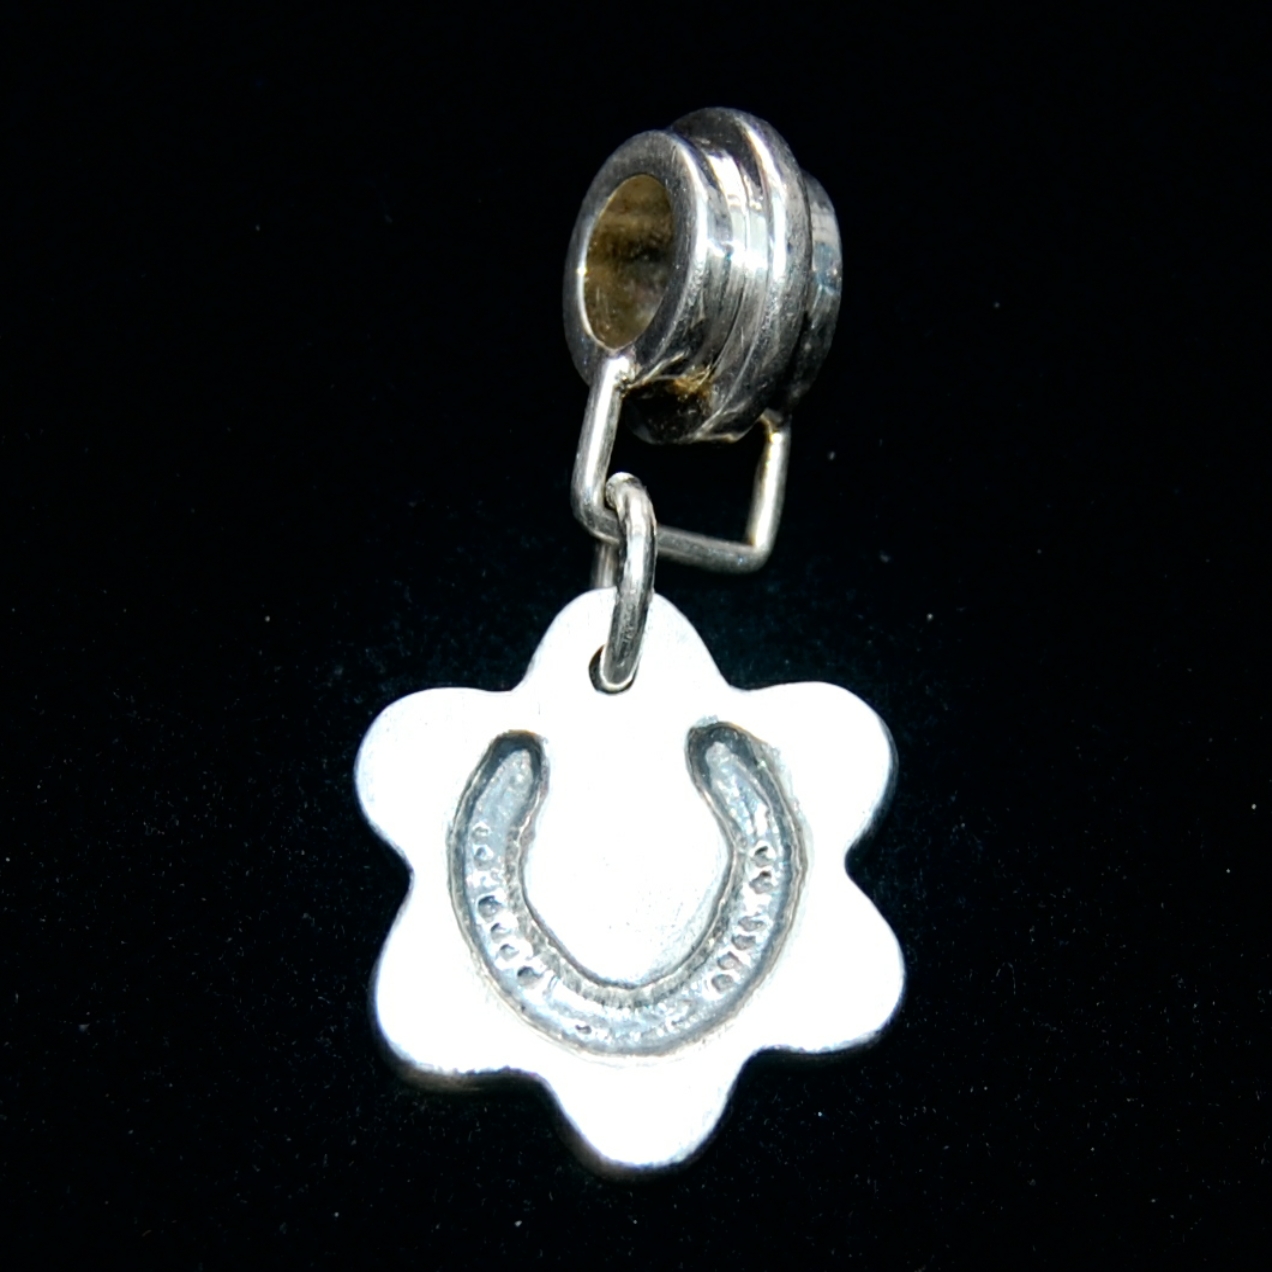 Small silver flower charm with your horse's shoe imprint. Securely attached to a charm carrier ready to add to your bracelet.